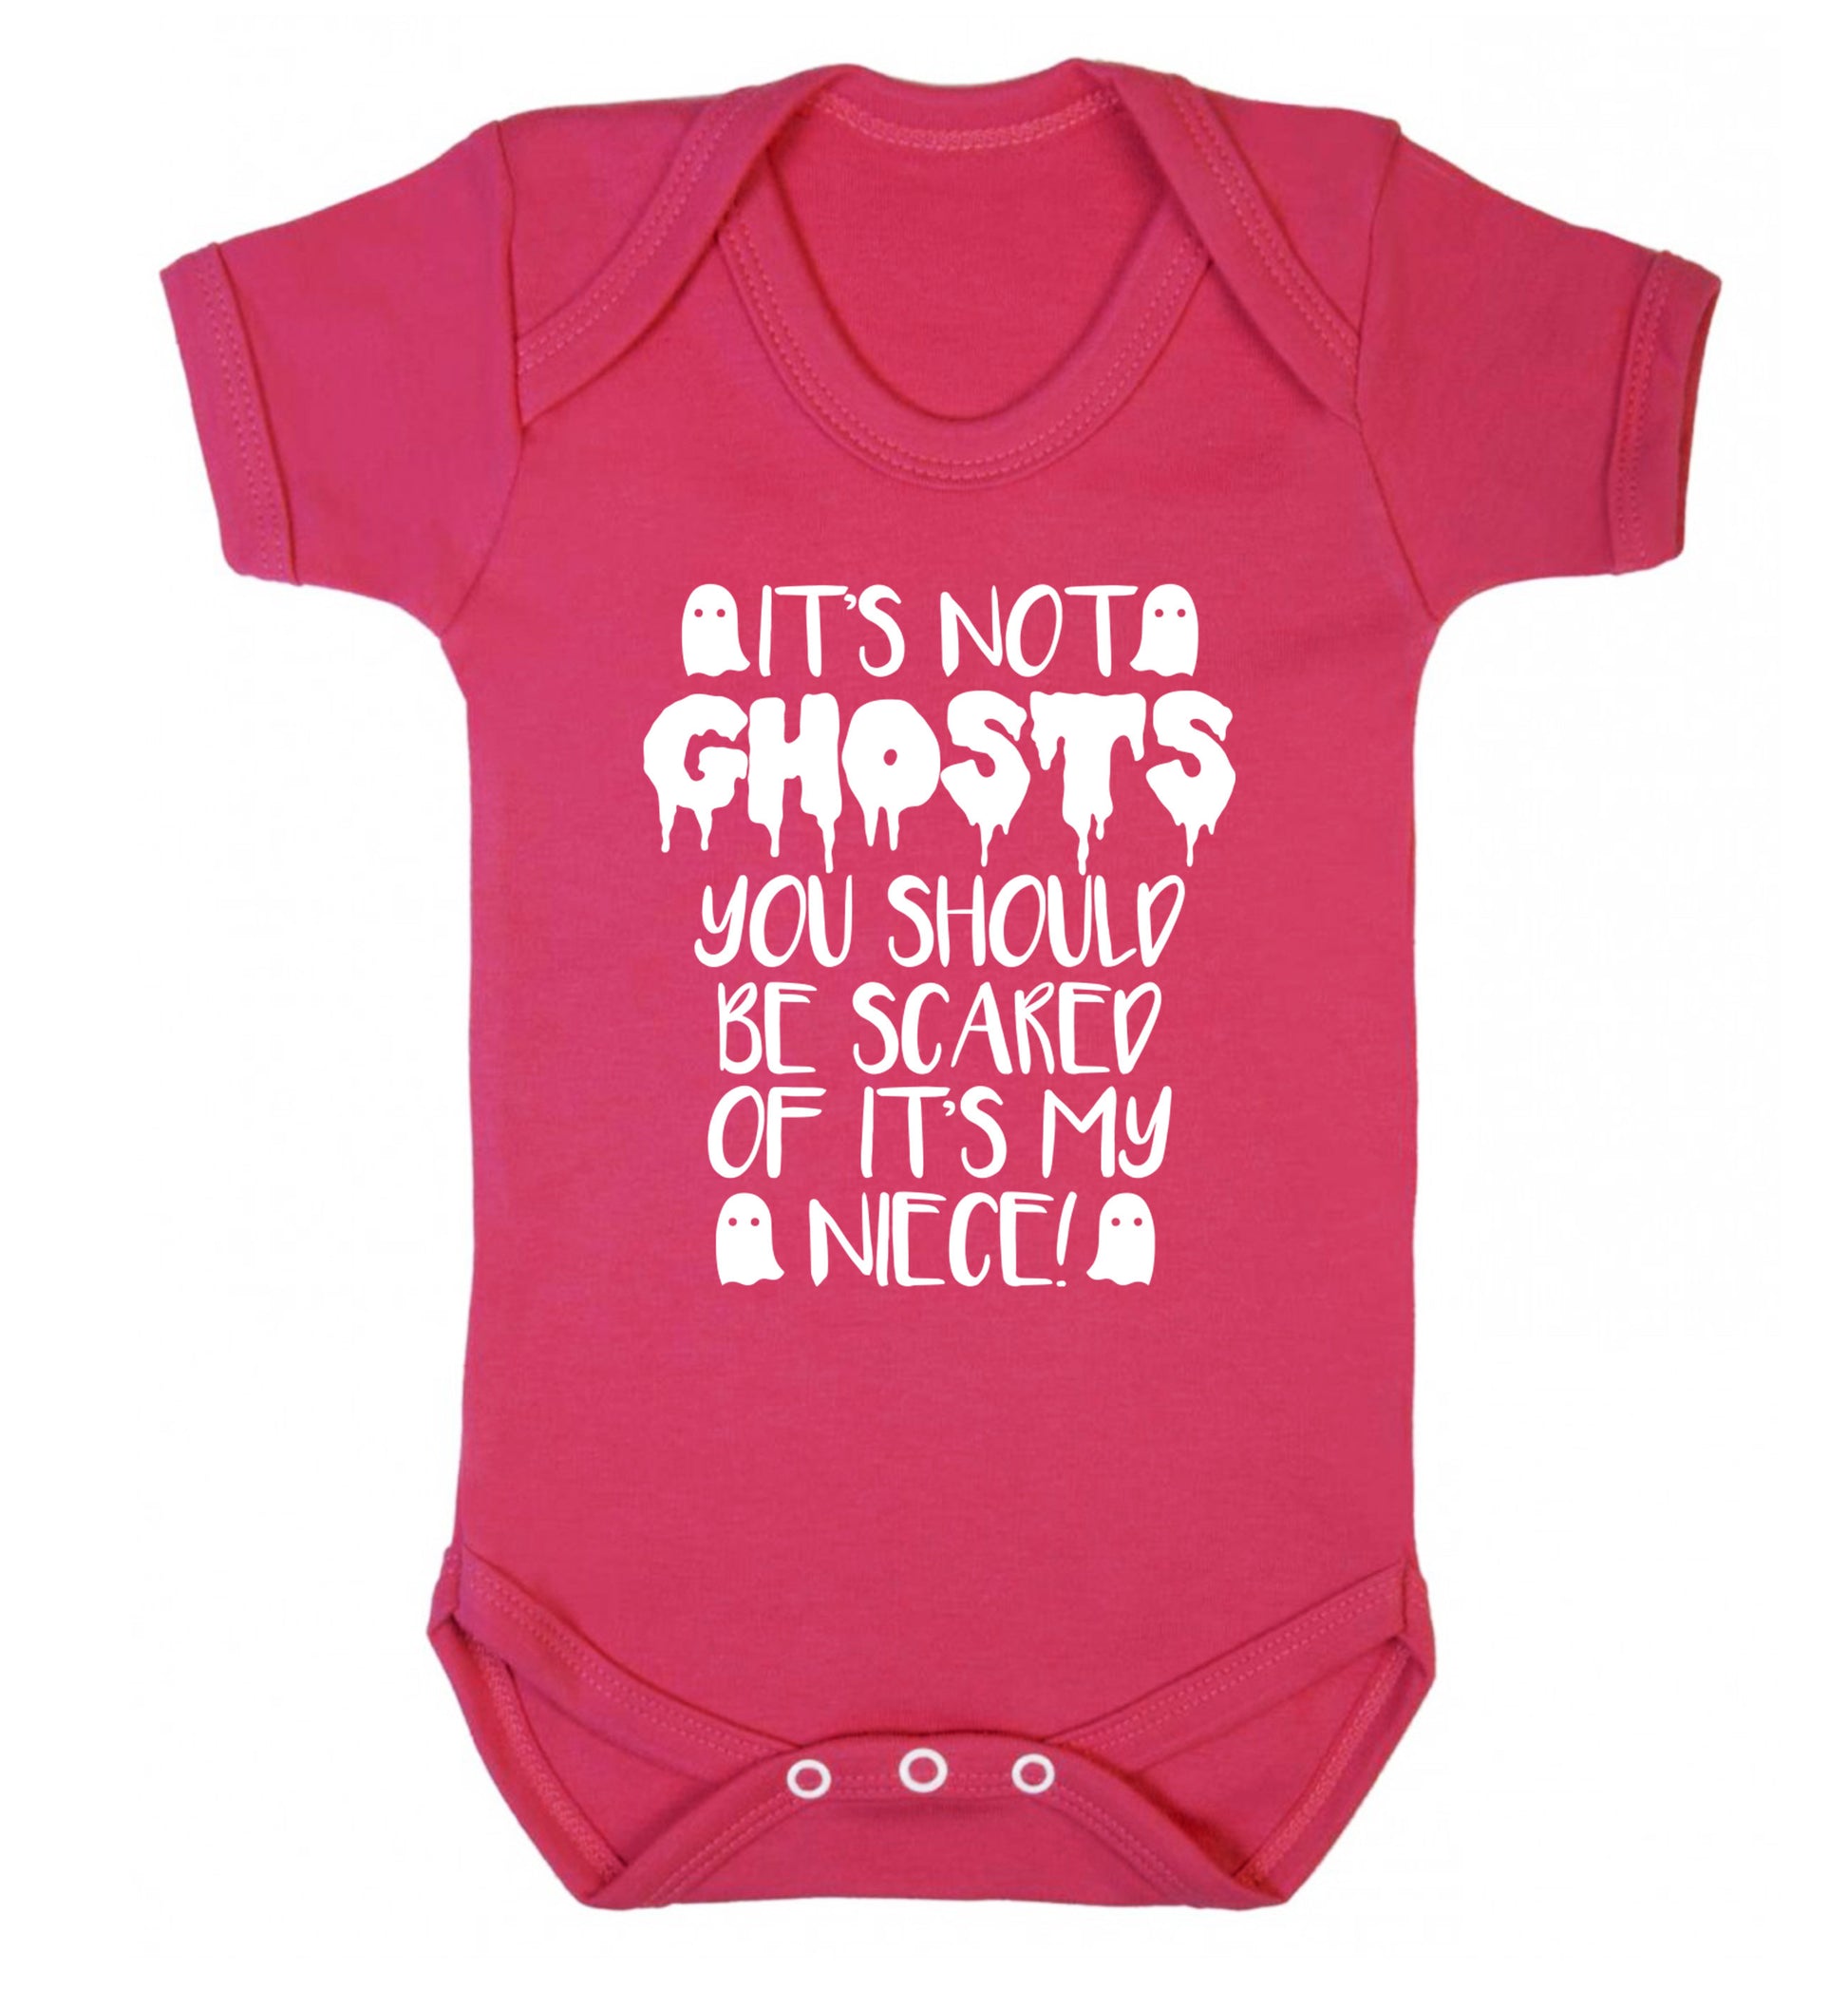 It's not ghosts you should be scared of it's my niece! Baby Vest dark pink 18-24 months